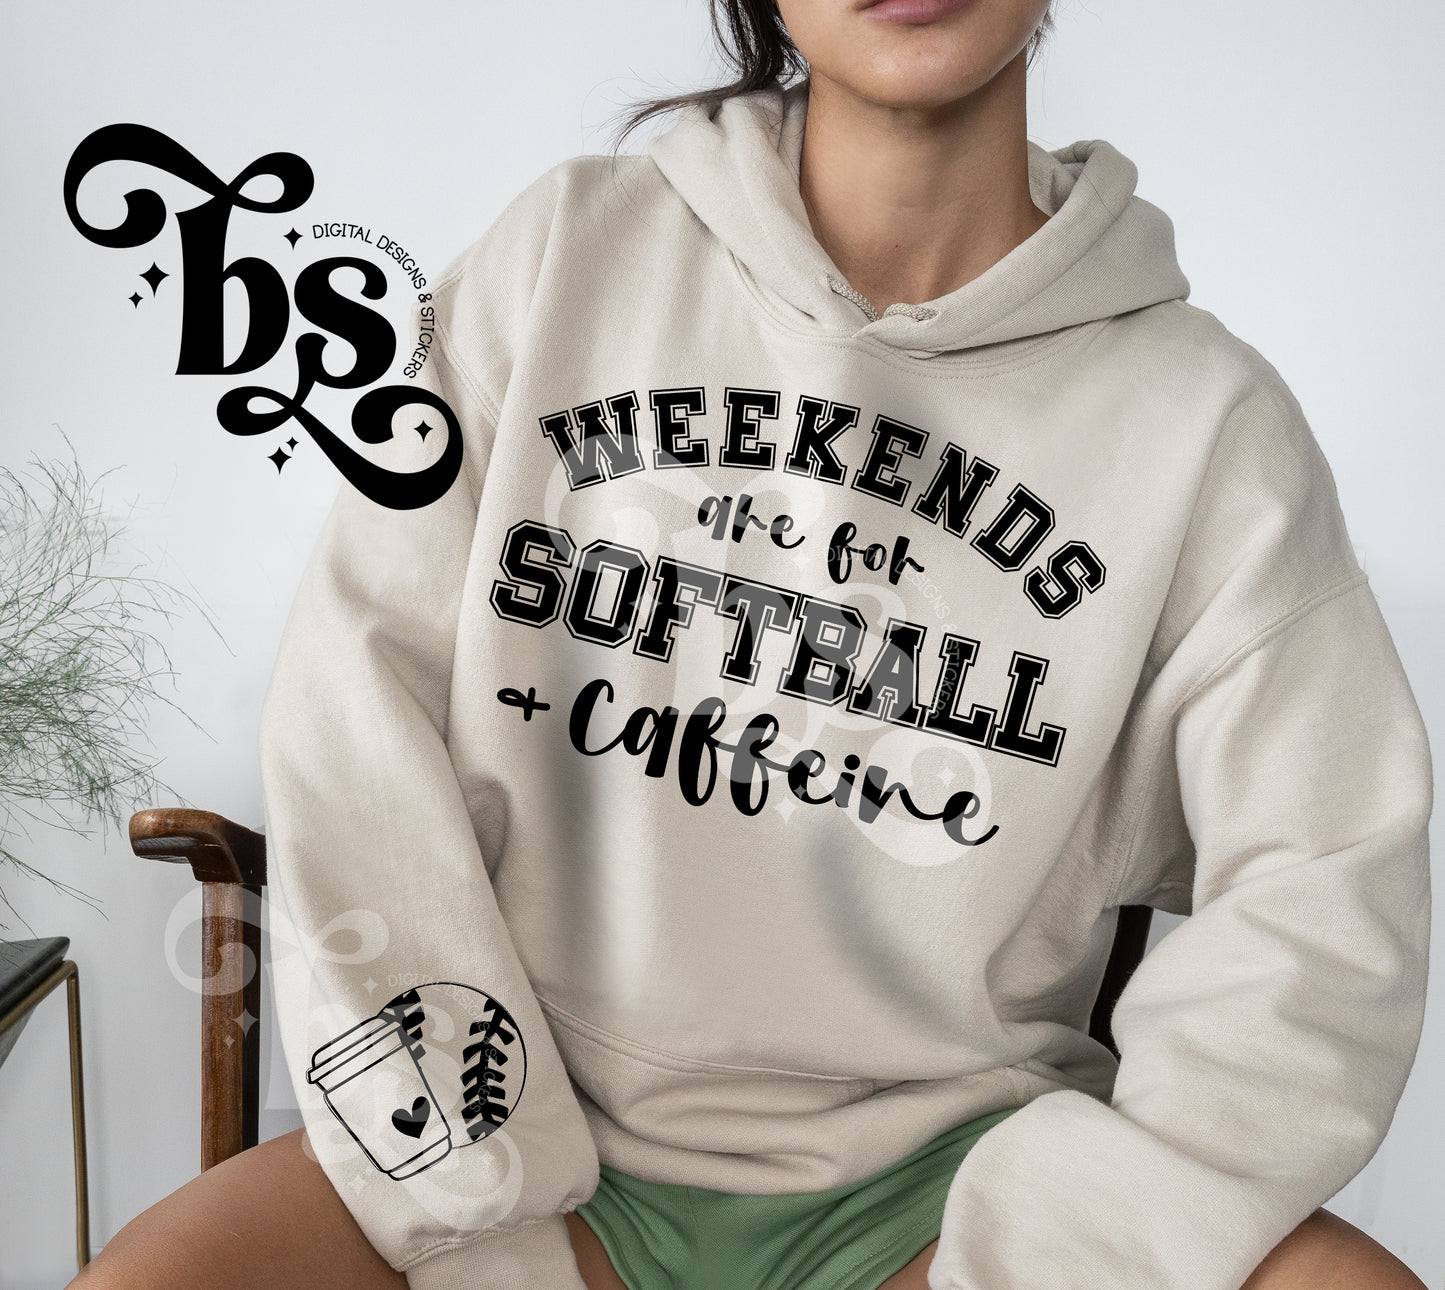 Weekends are for softball and caffeine